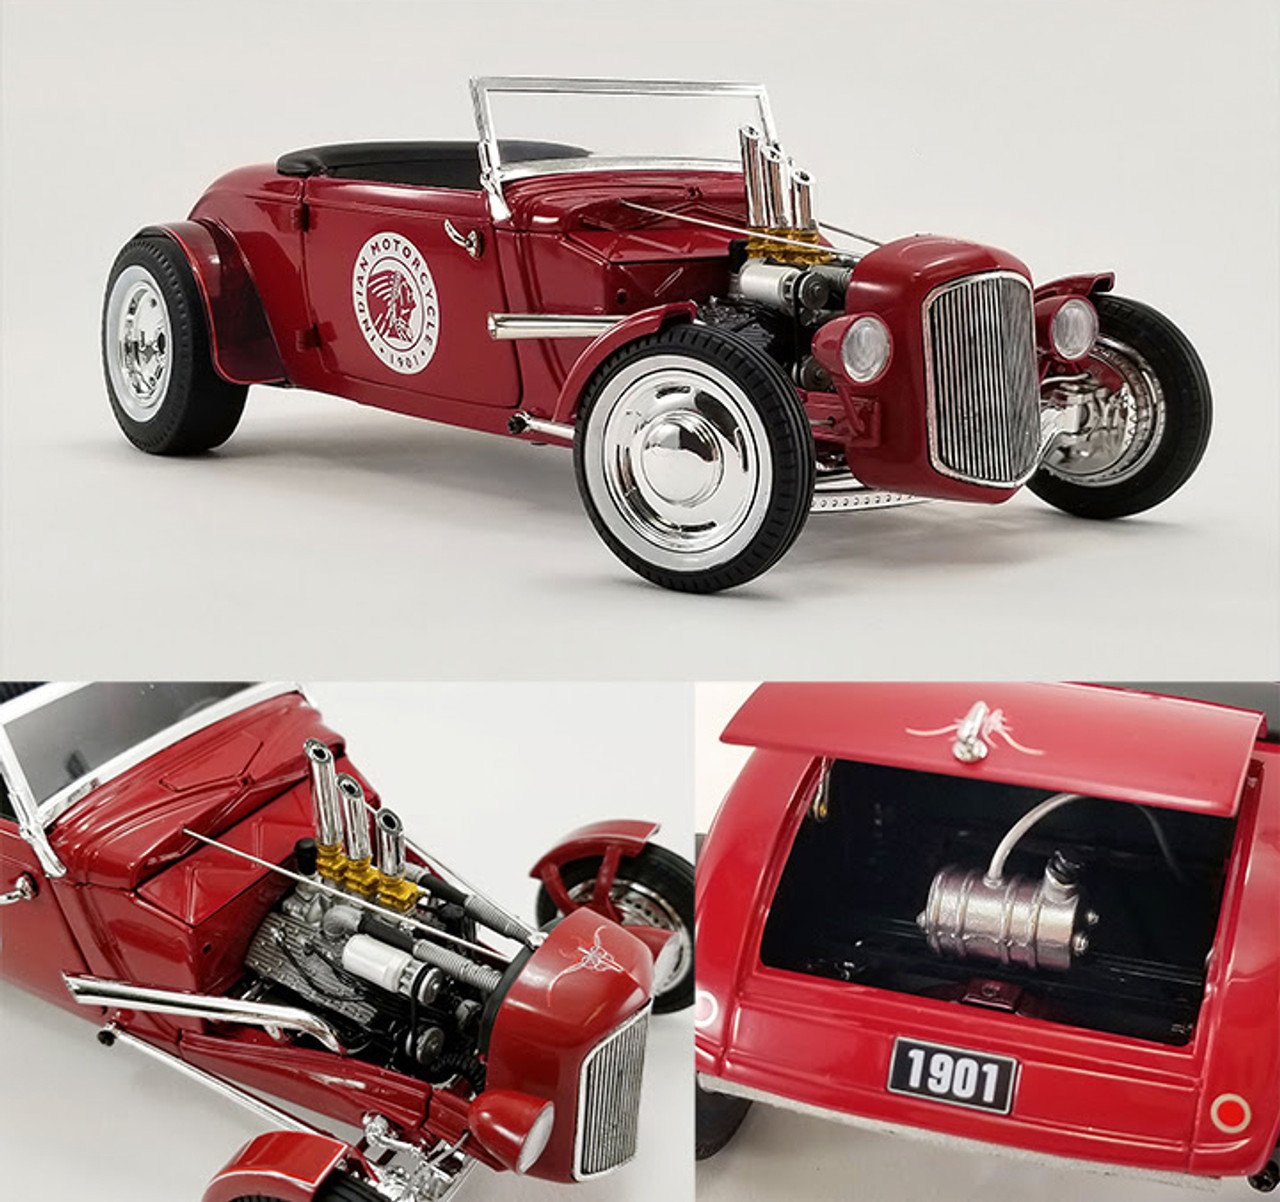 1/18 1934 Hot Rod Roadster- Indian Motorcycle " Since 1901" Diecast Car Model (June-July 2021)